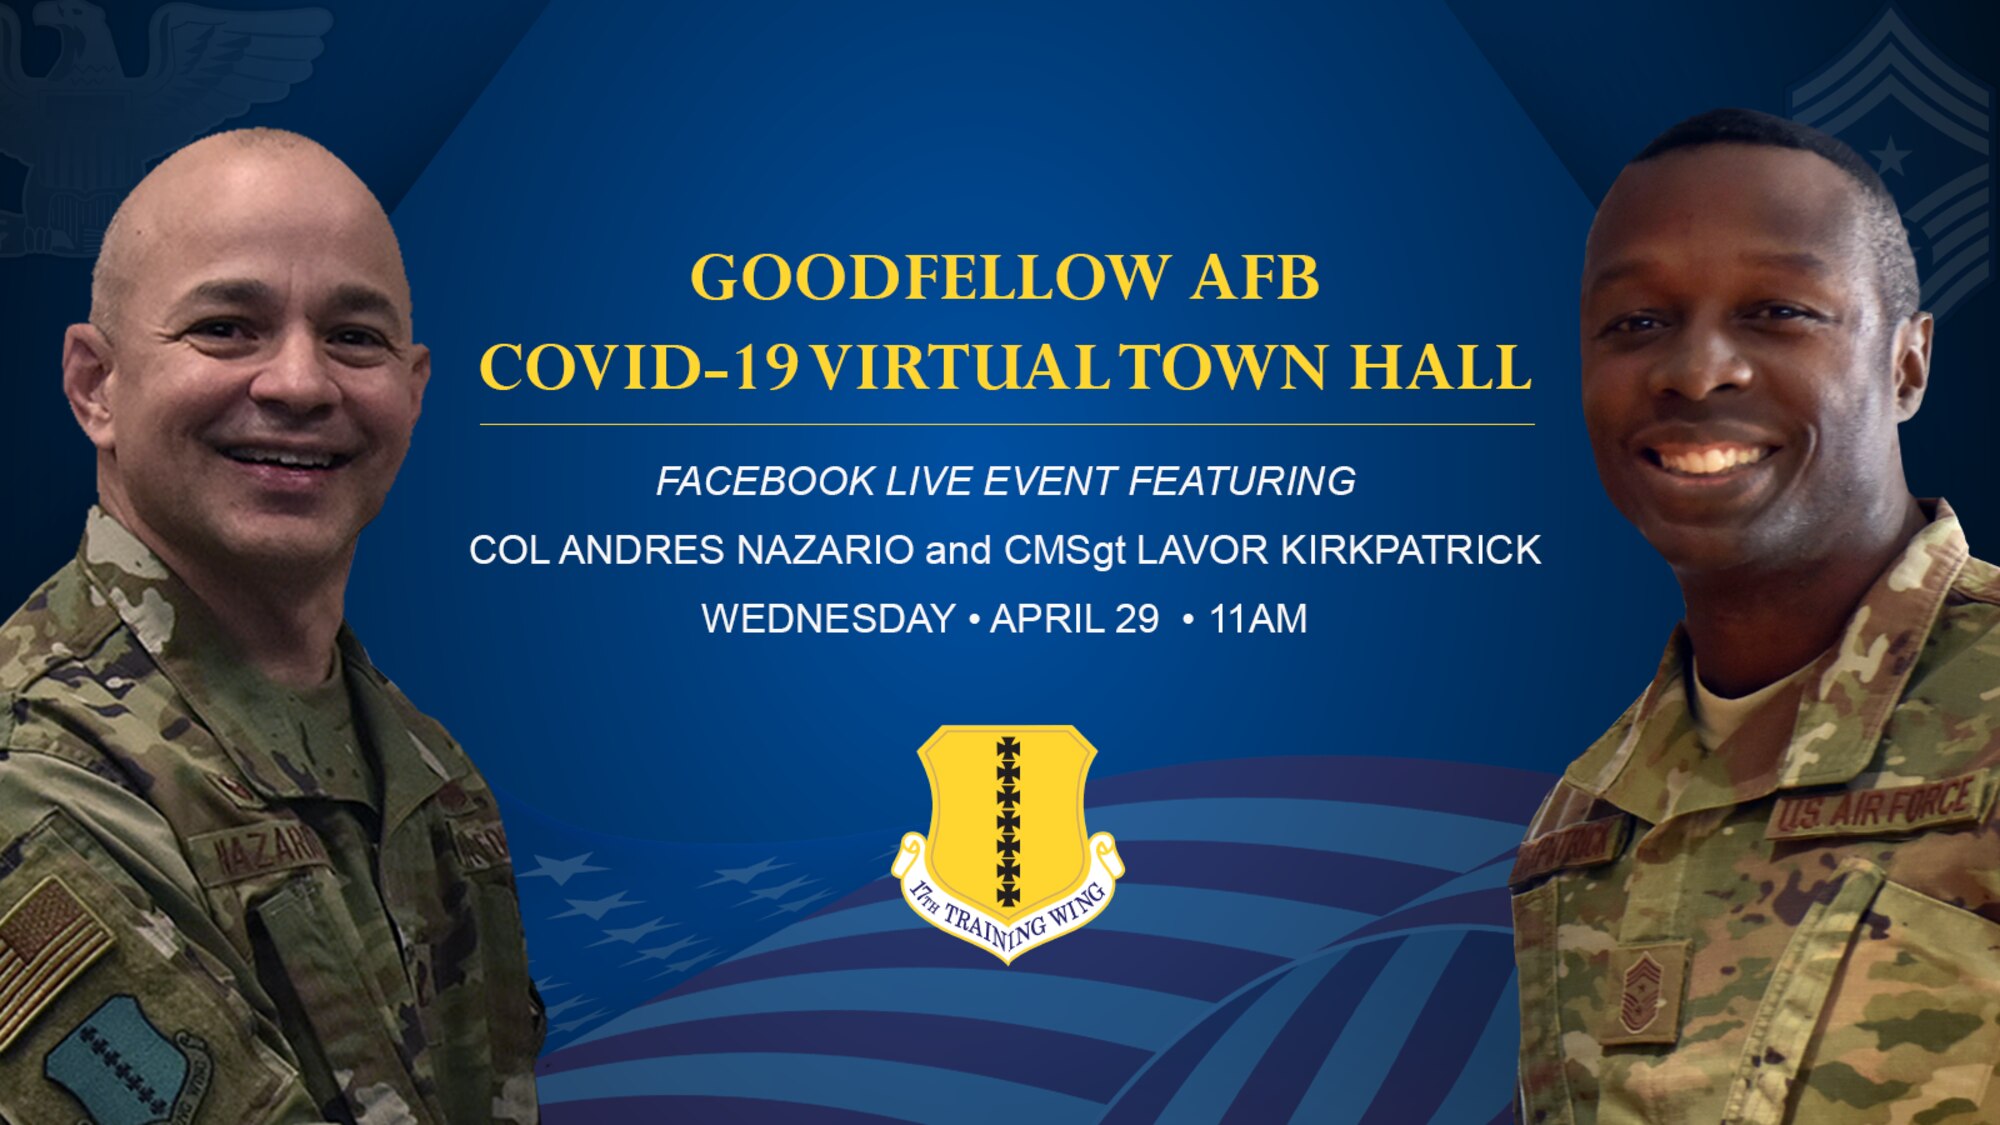 Graphic depicting information about COVID-19 virtual town hall held by Goodfellow AFB, Apr 29 2020